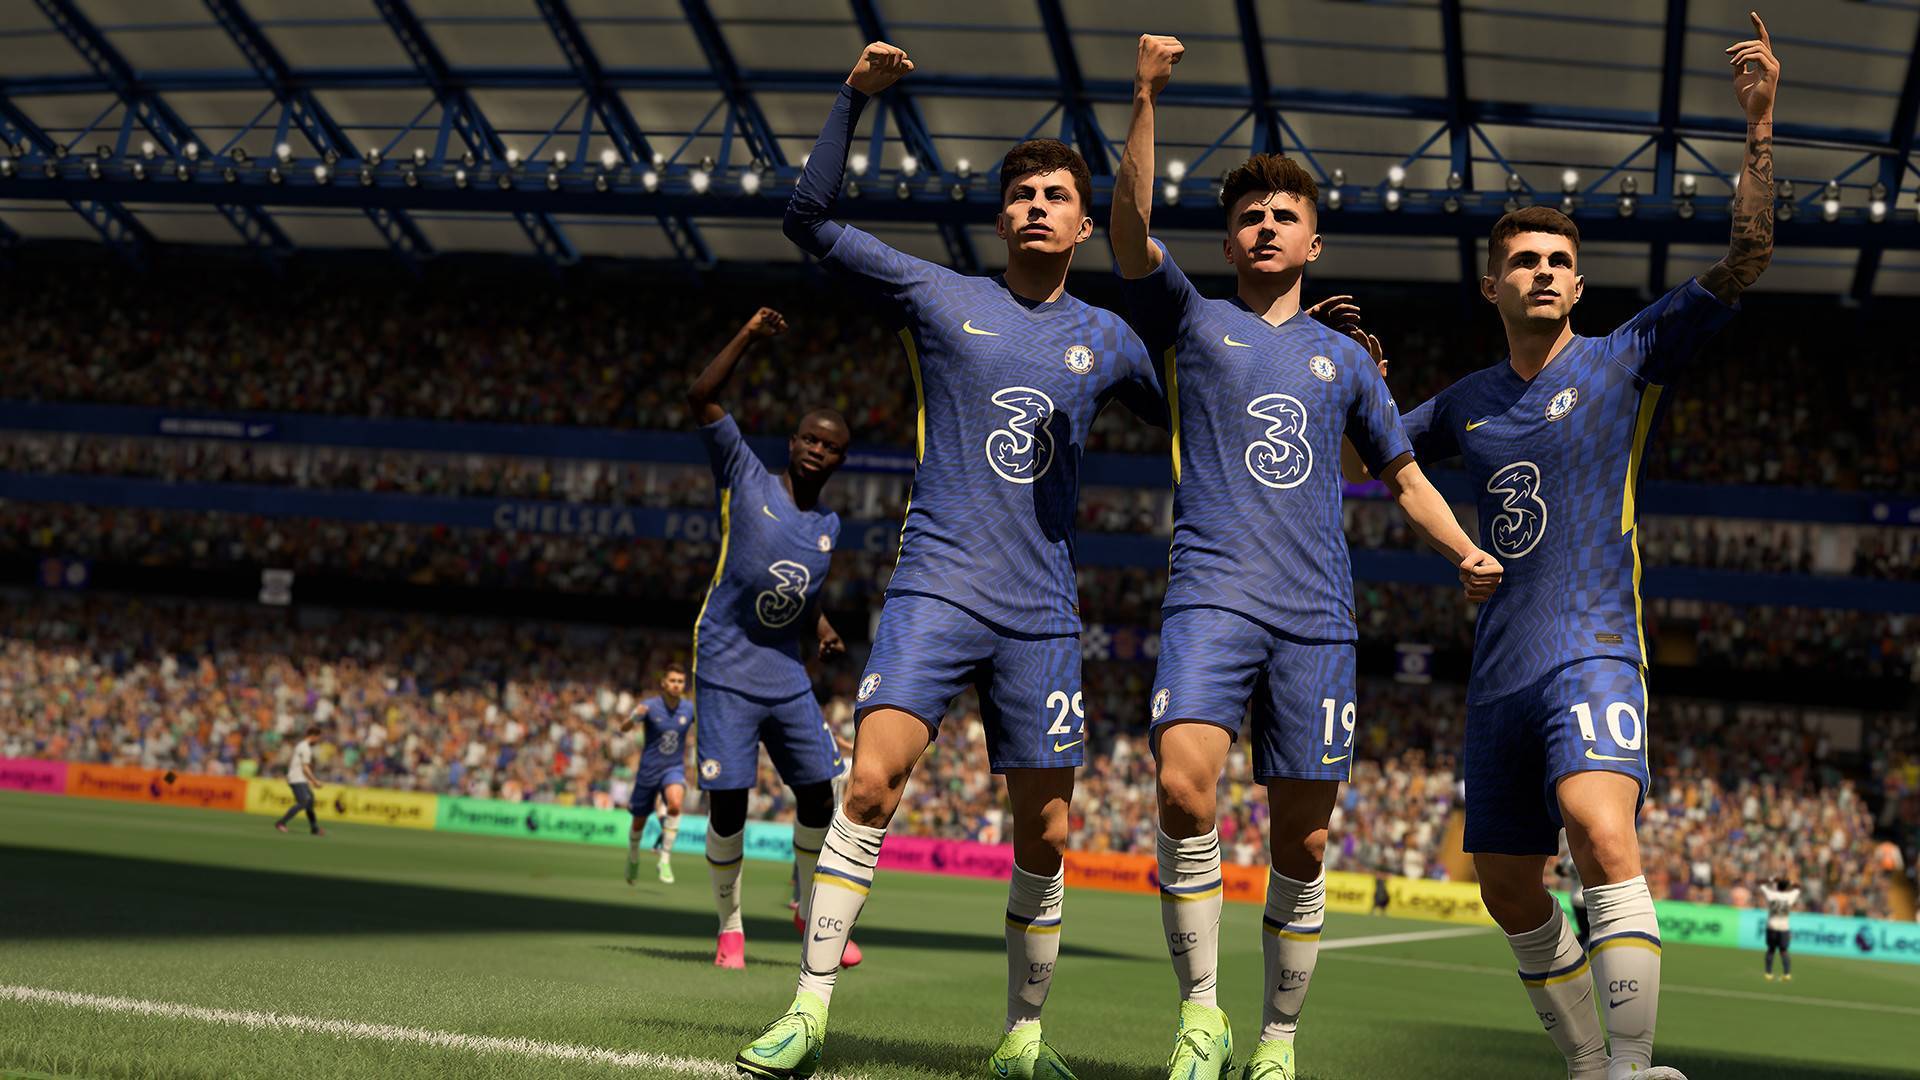 FIFA 22 (PS5) cheap - Price of $16.69